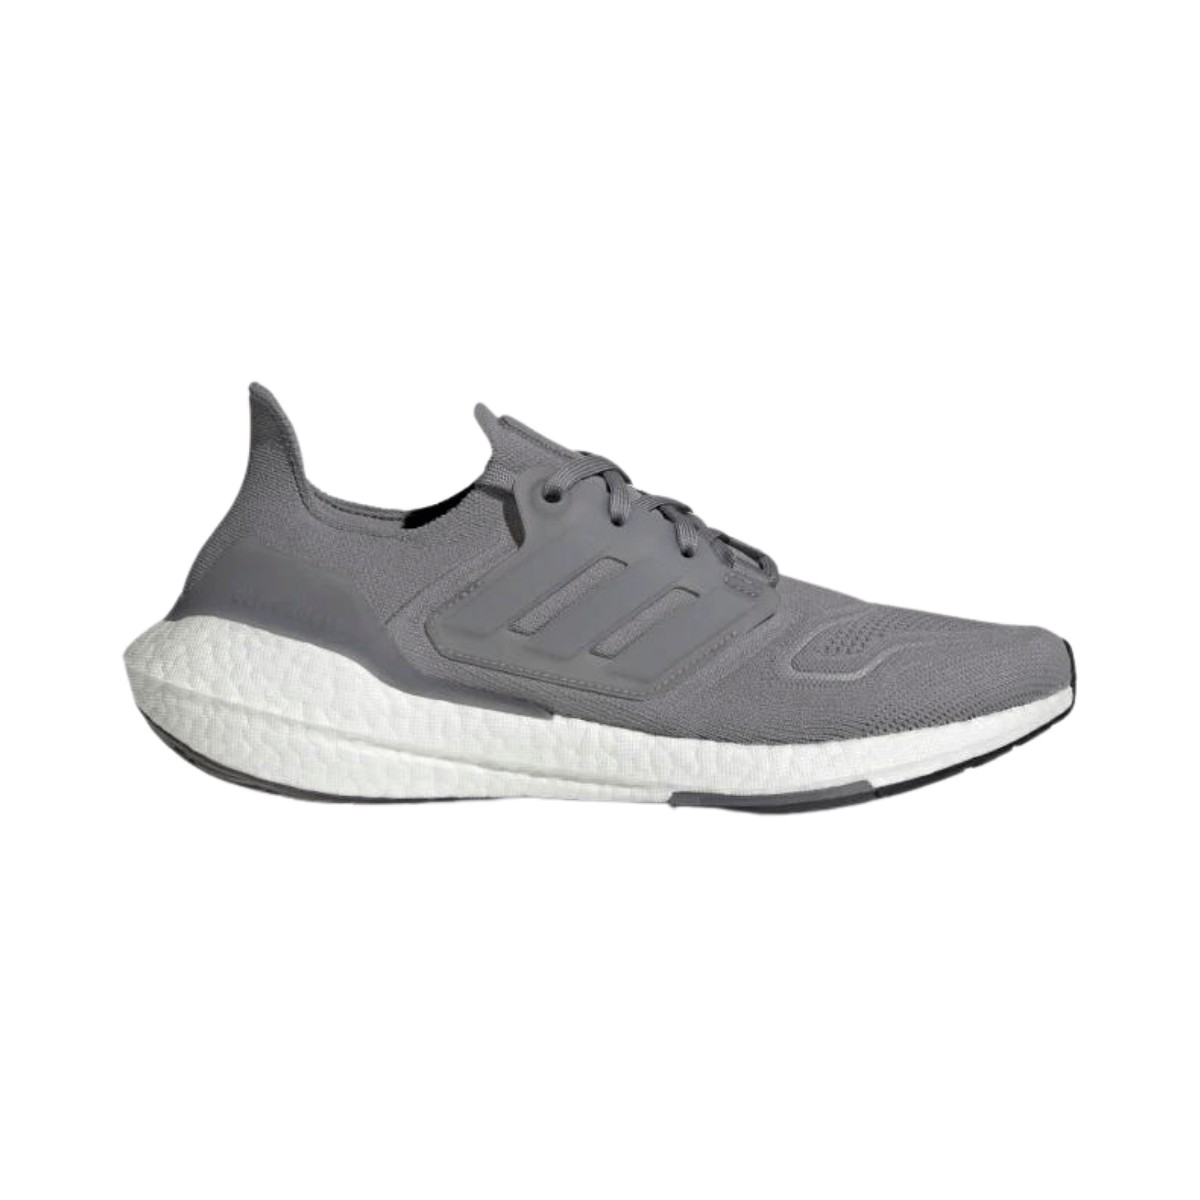 Chaussures Adidas Ultraboost 22 Gris, Taille UK 7.5